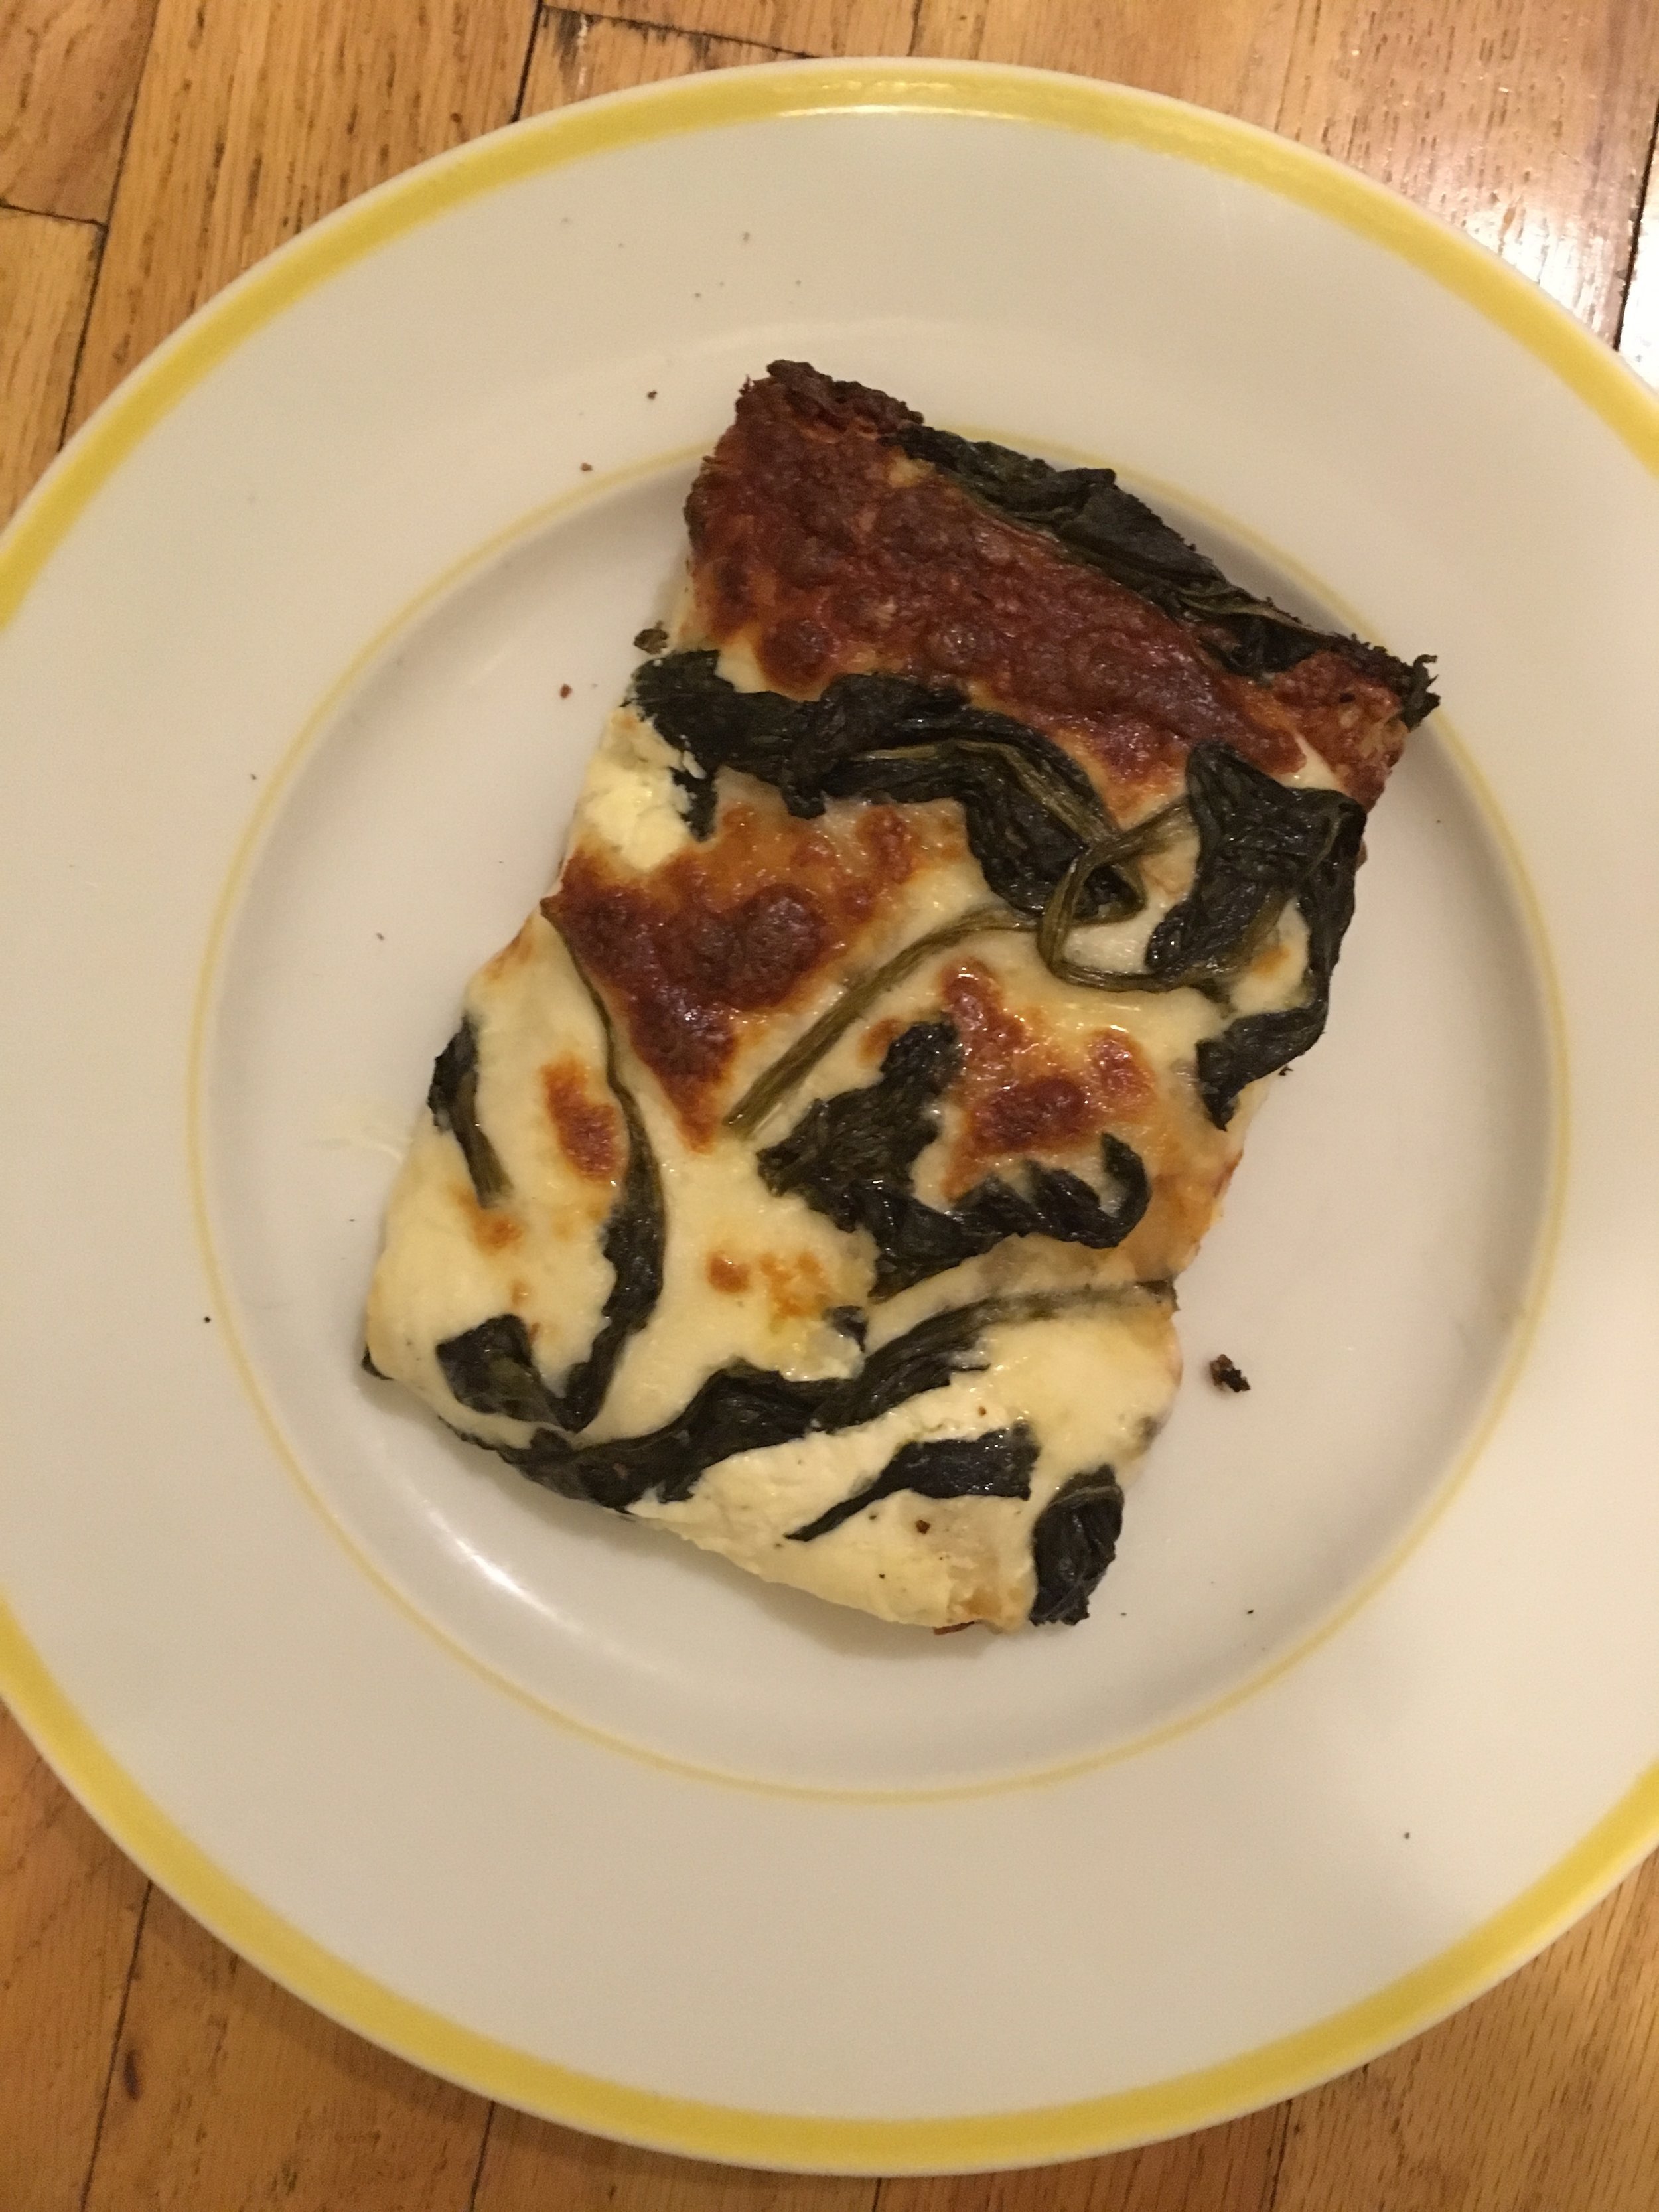 Spinach and ricotta